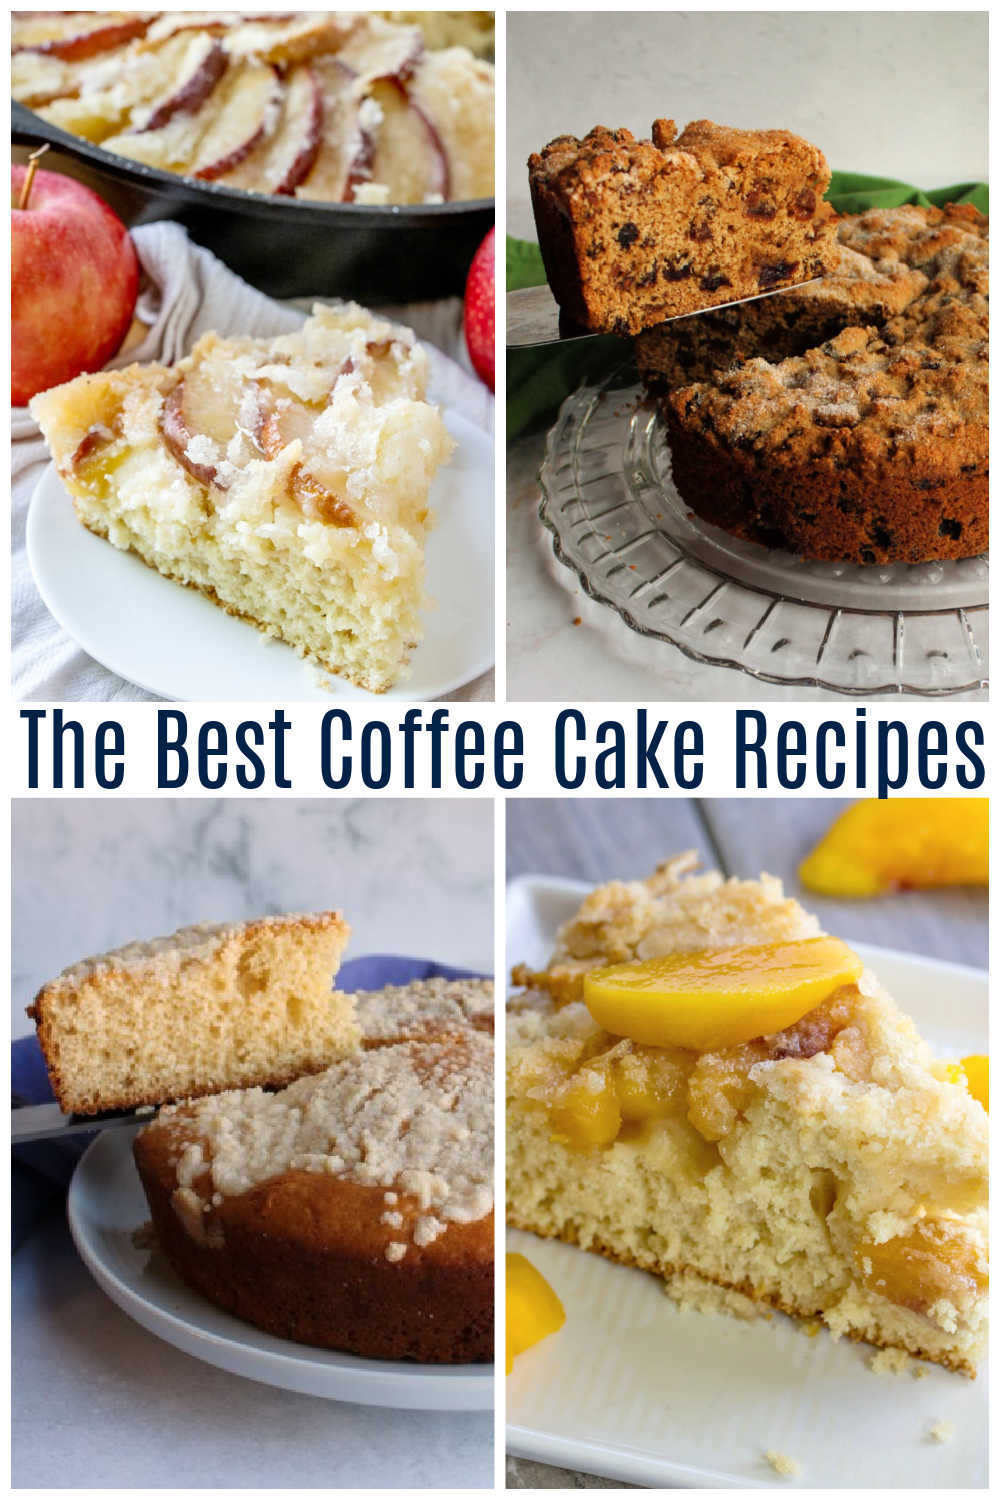 Start your day off with something sweet. These coffee cake and pastry recipes are perfect for breakfast or brunch.